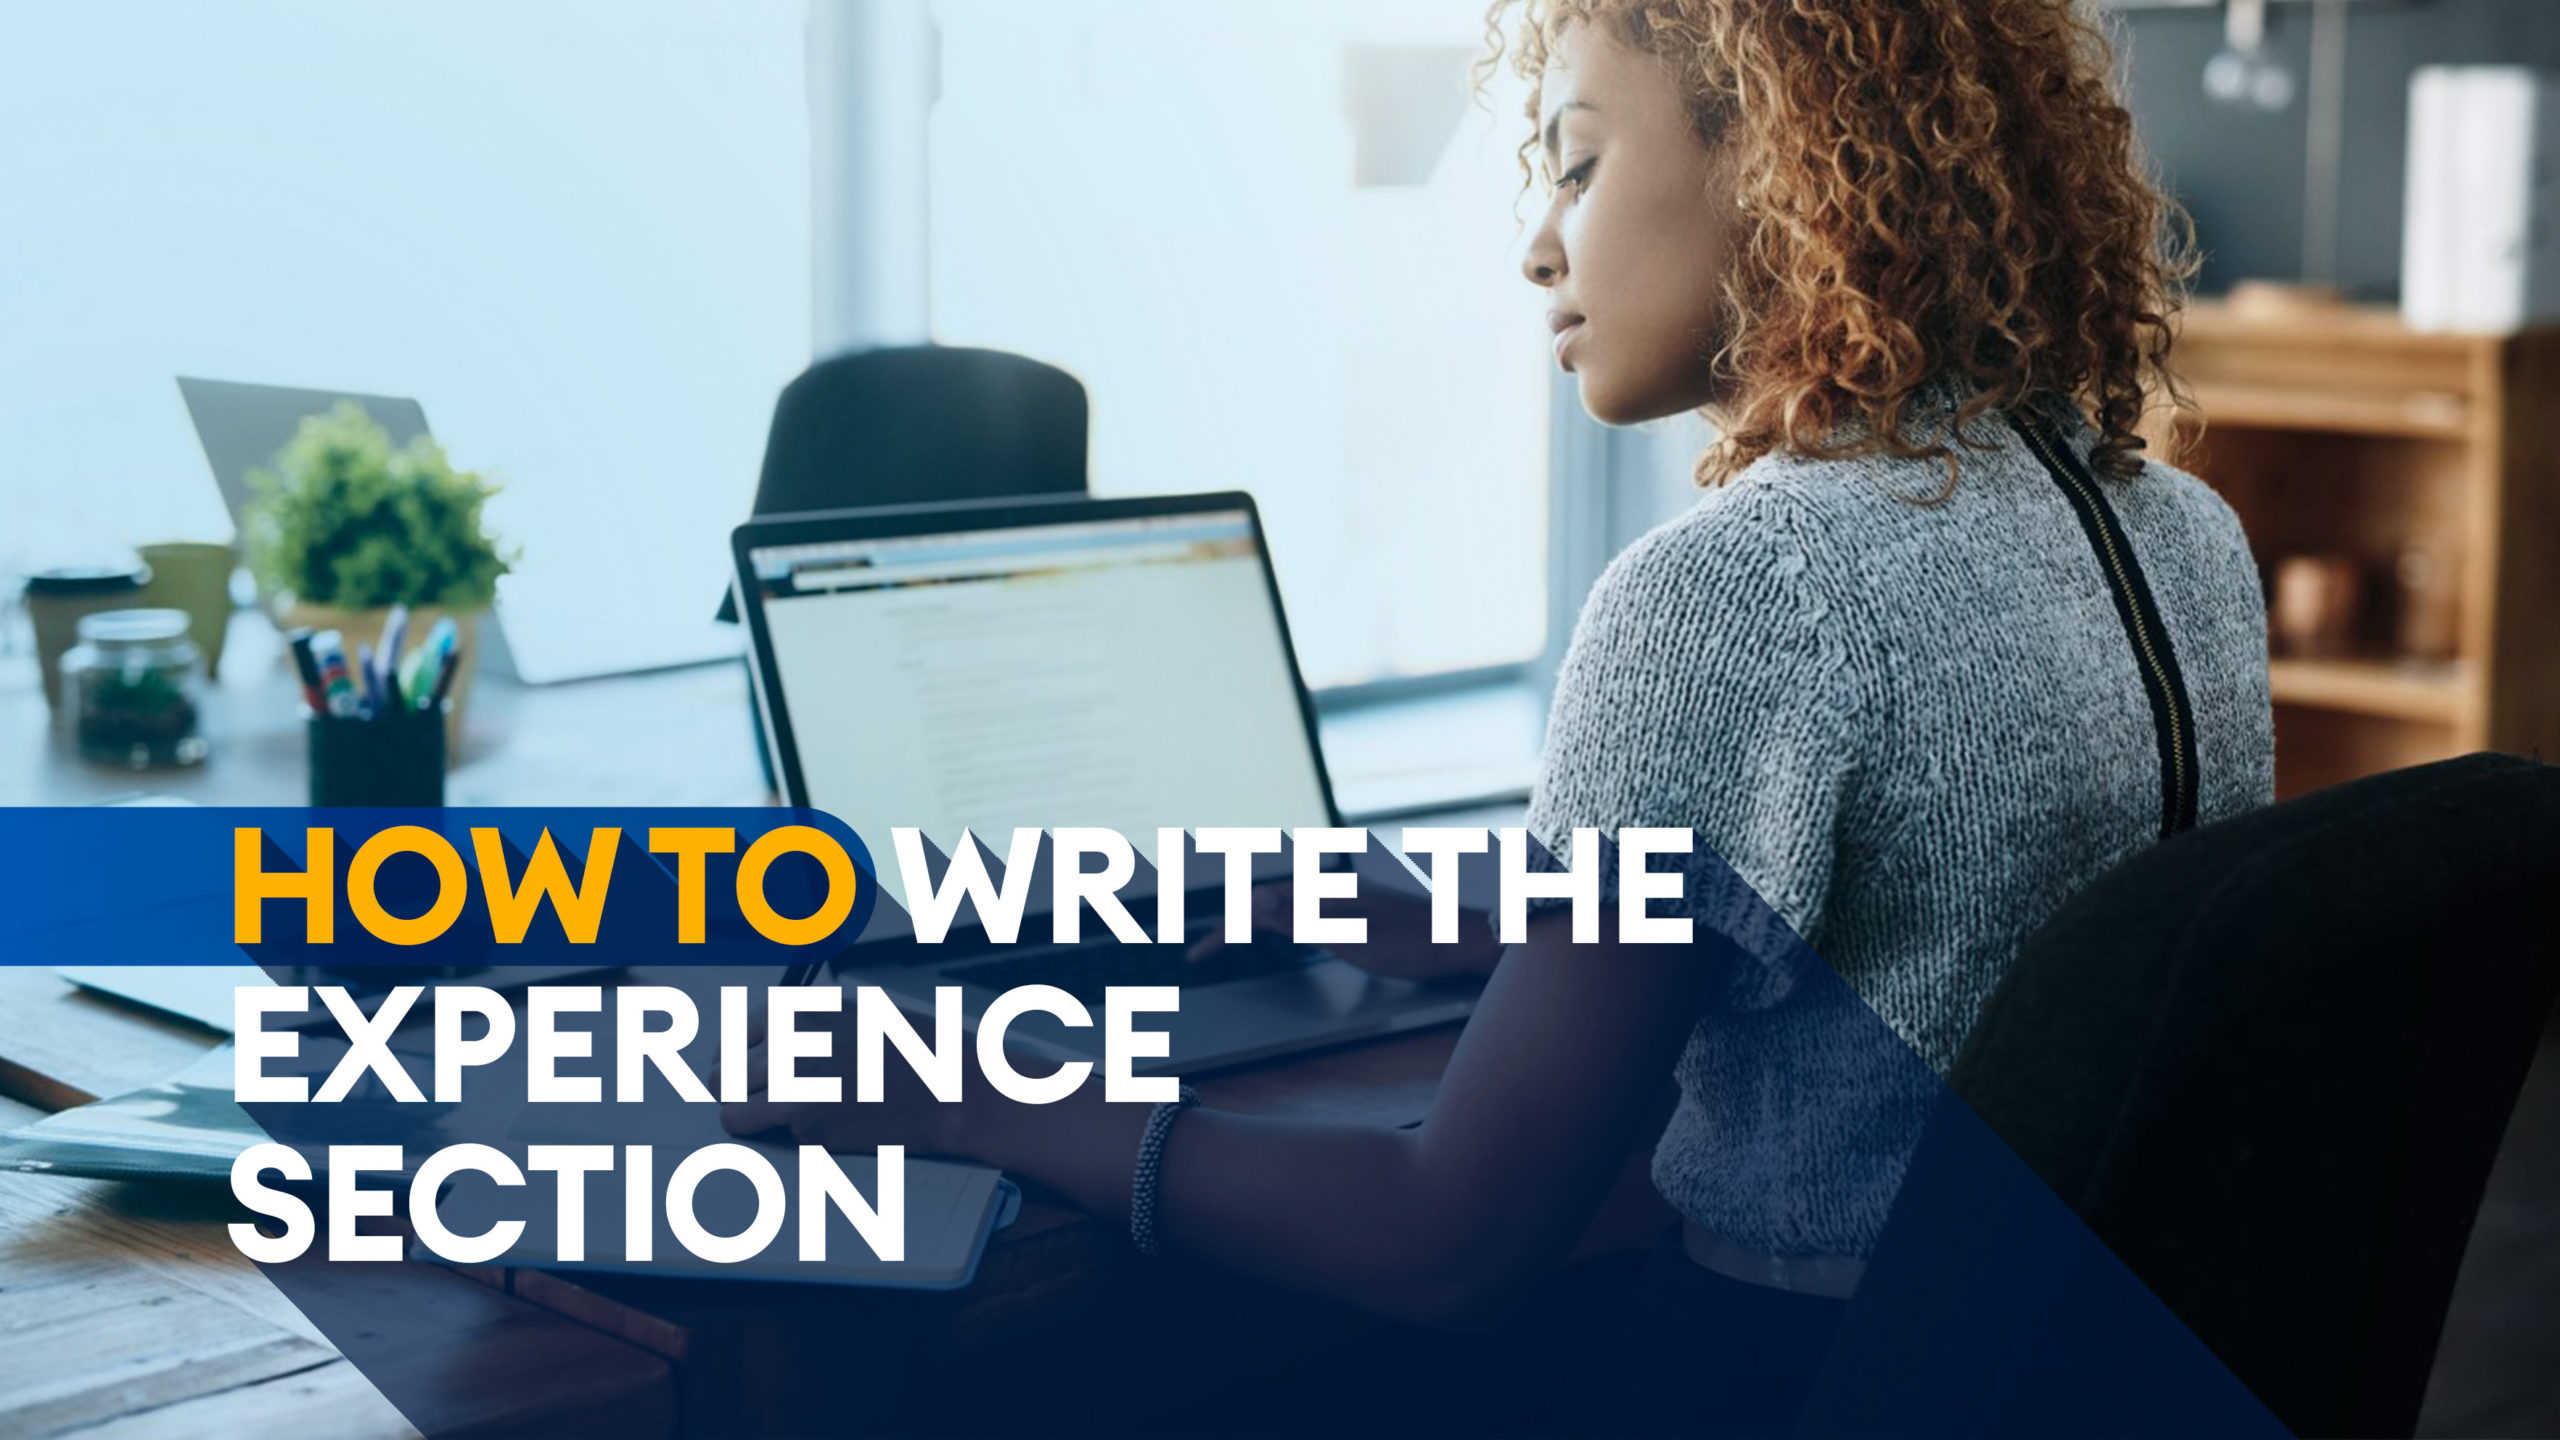 How to write the experience section